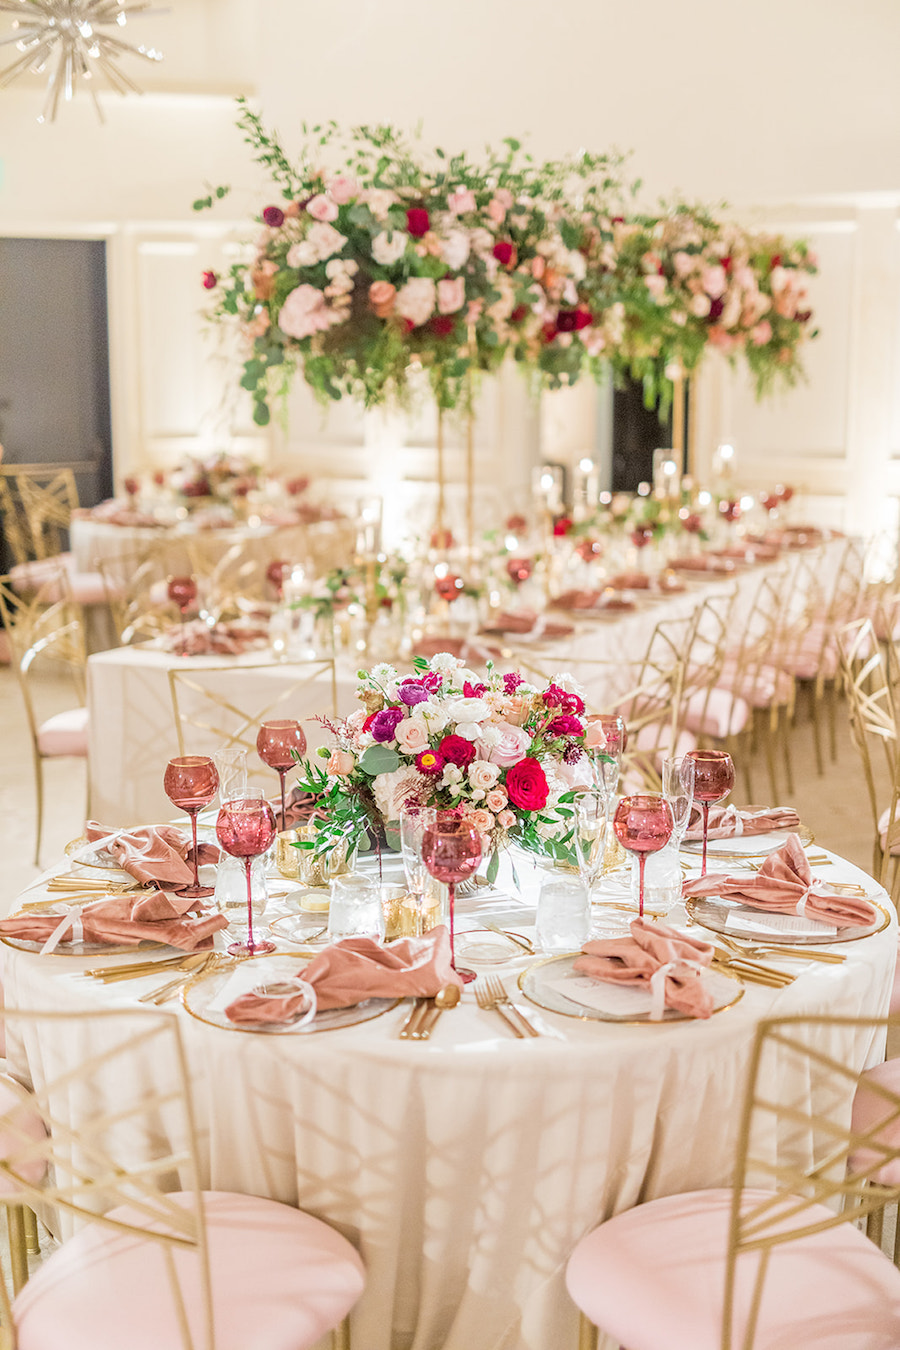   Hotel Bel Air Wedding Featured on Southern California Bride